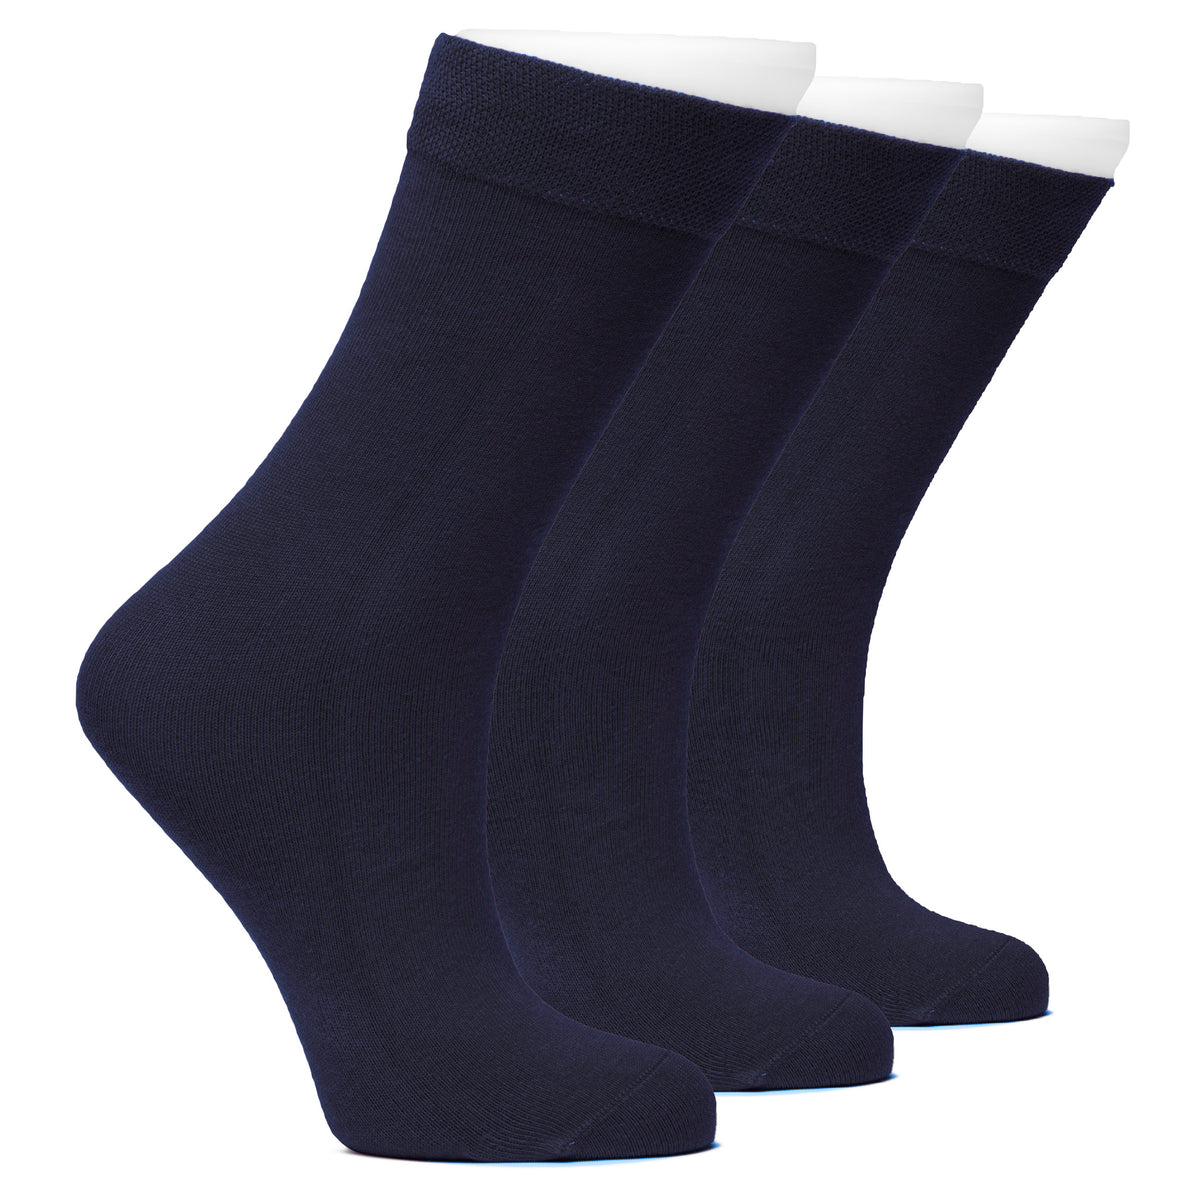 Outstanding Compact Cotton Seamless Toe Plain Color School Socks For Kids, 3 Pairs | 10-14 Years | Dark Grey